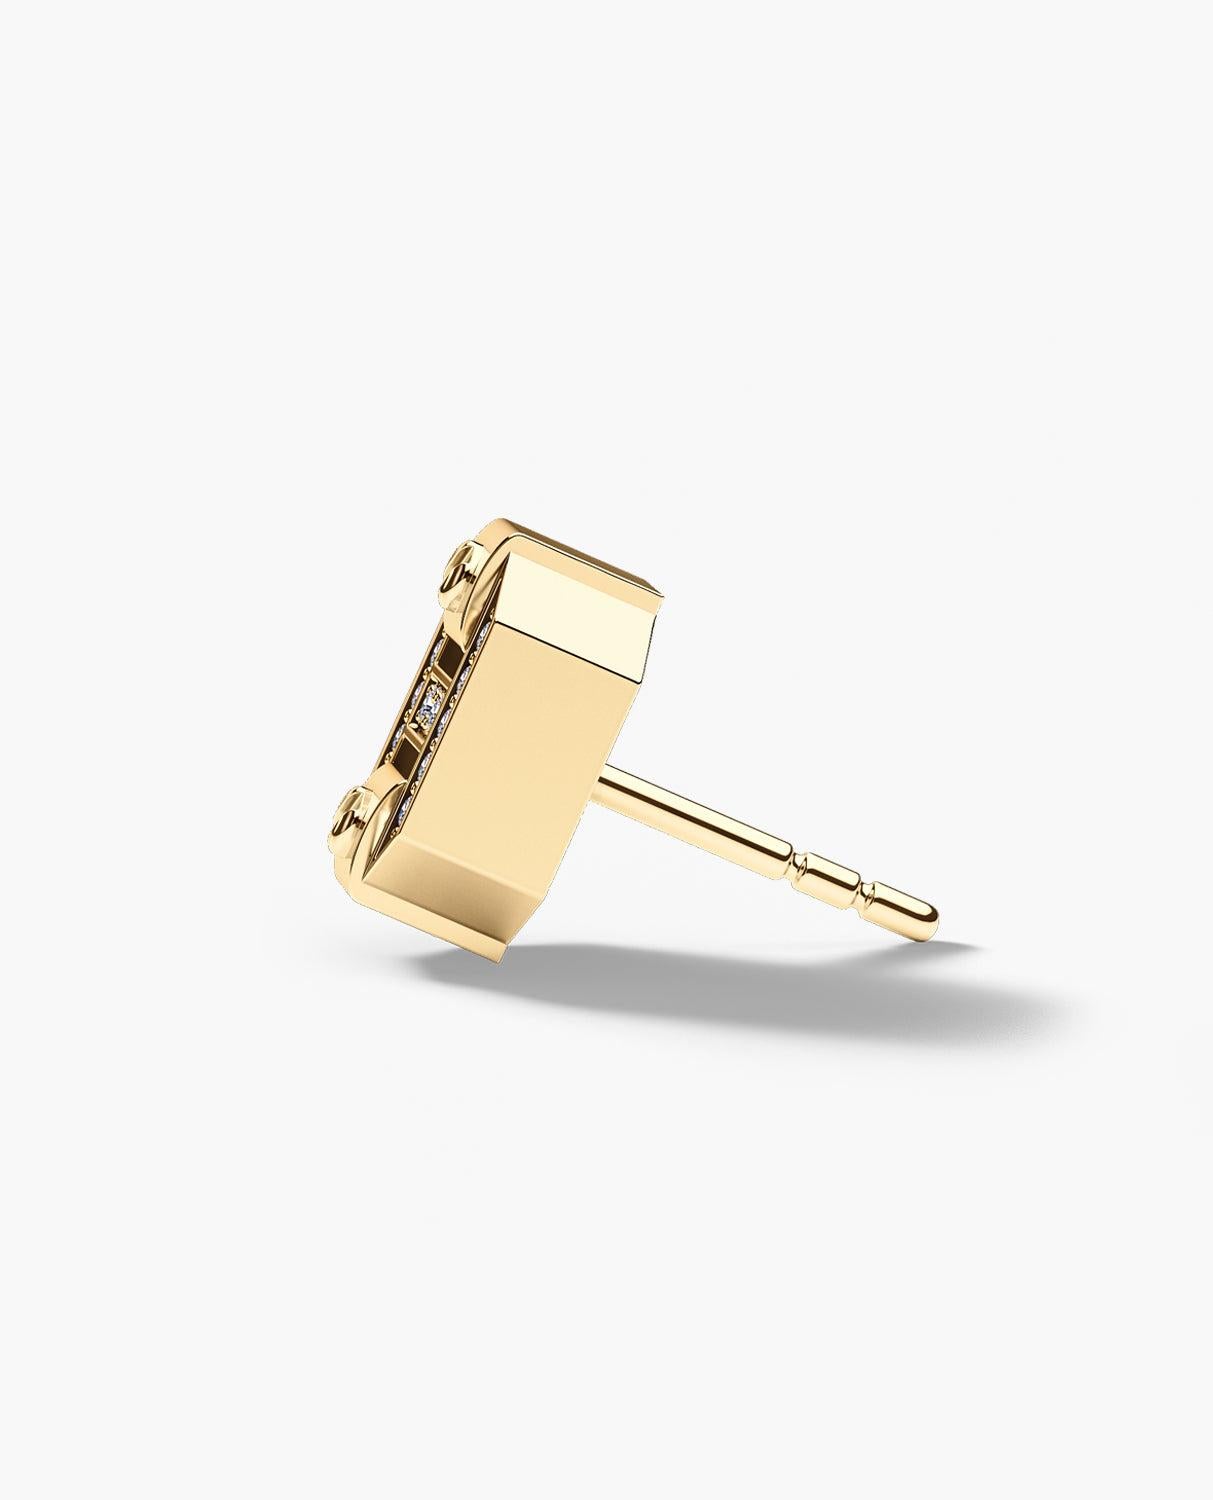 Iconic BRIGGS Gold Single Stud Earring with 0.08ct Diamonds. Rockford stud earrings are available with white diamonds in gold. Ready to Ship earrings are pre-produced, unworn pieces. This earring have a short turn-around time of only 1-2 business